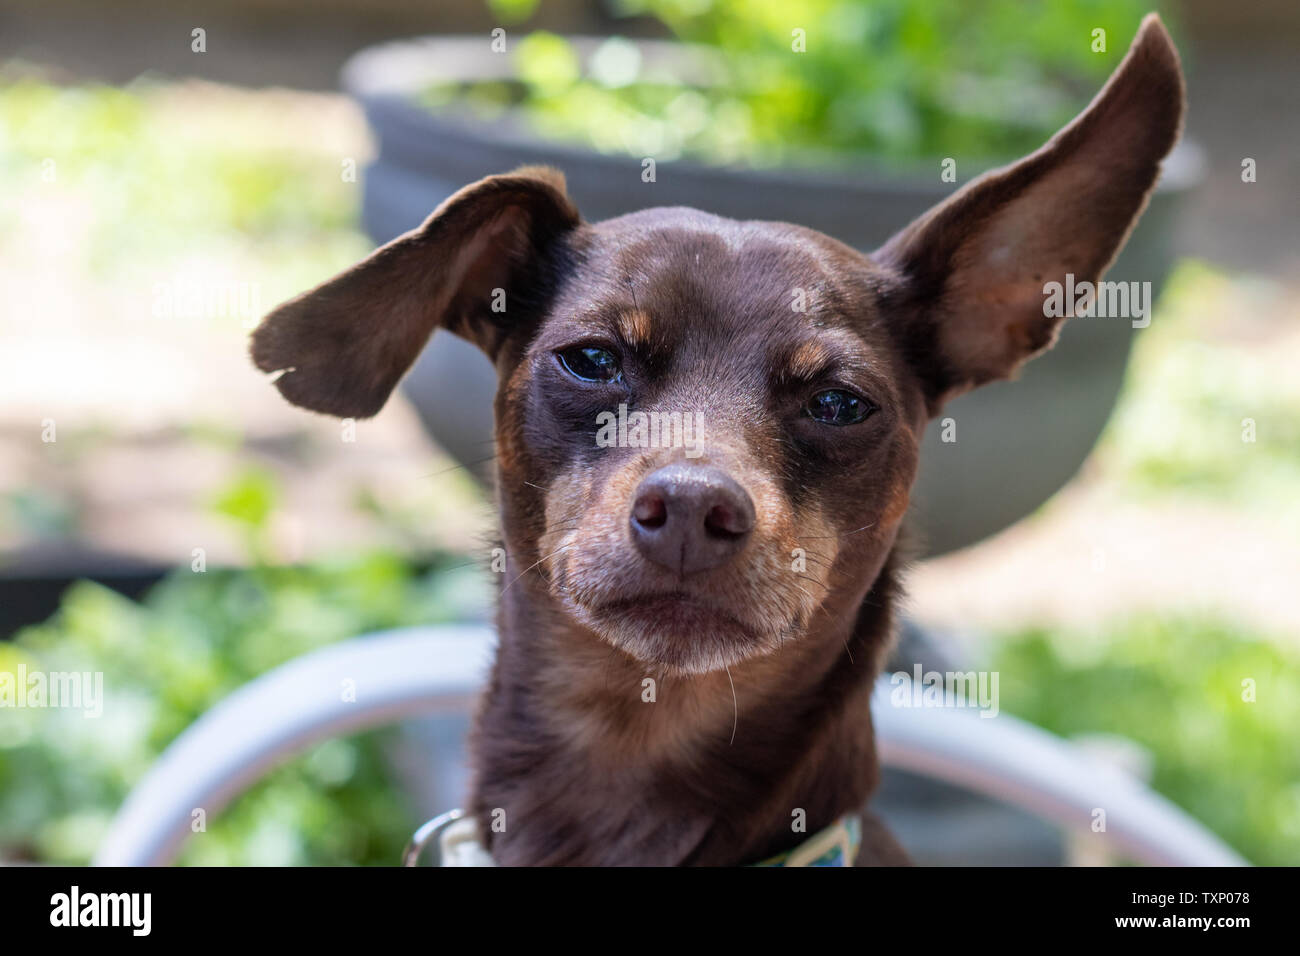 brown pisncher dog portrait expression apathetic neutral Stock Photo